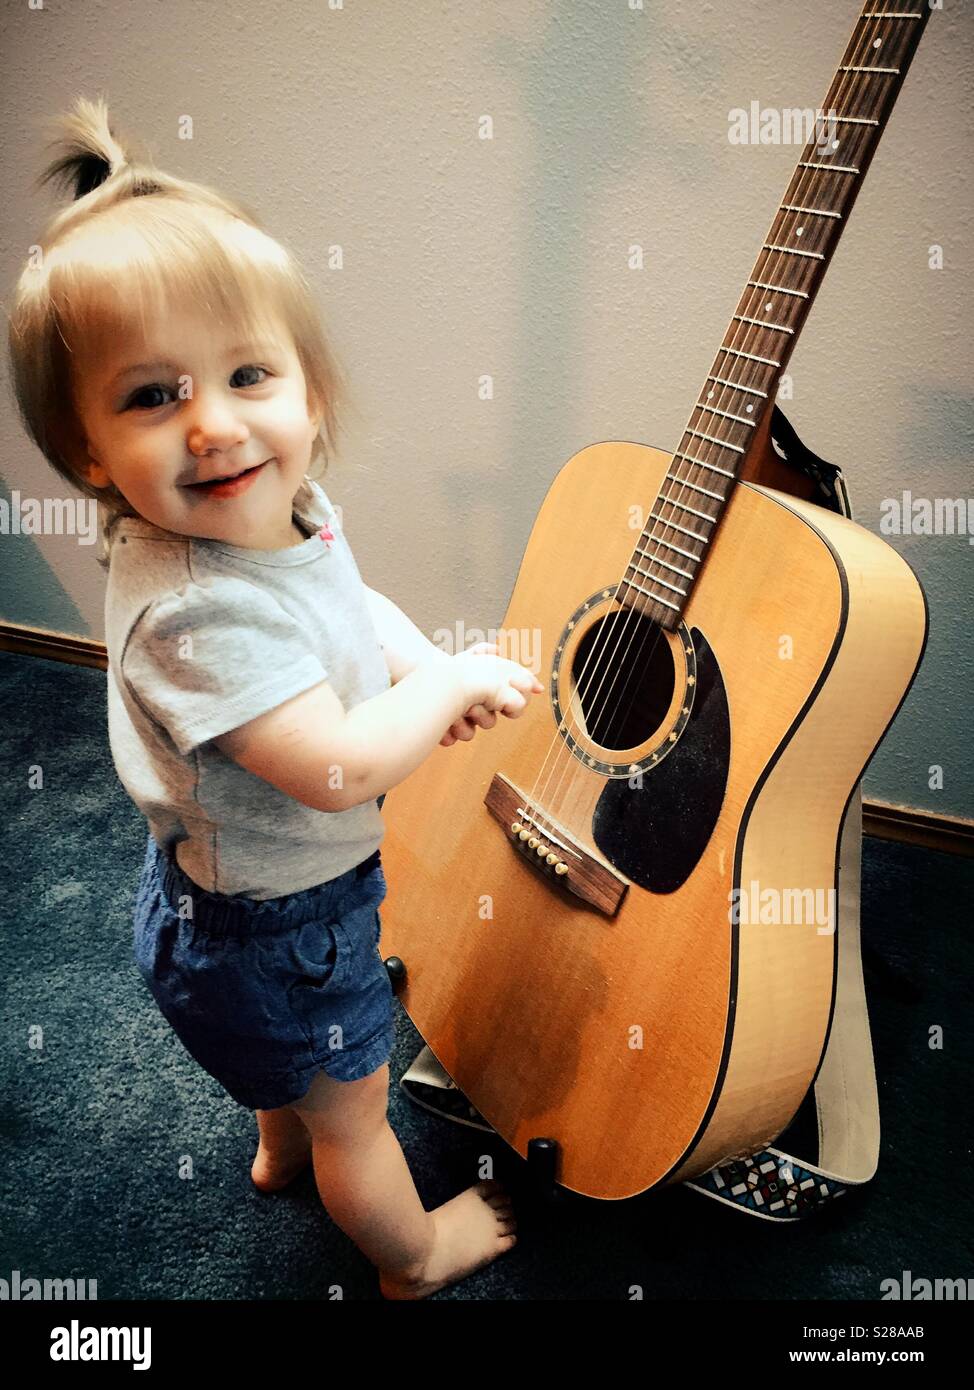 Cute baby girl and an acoustic guitar, USA Stock Photo - Alamy